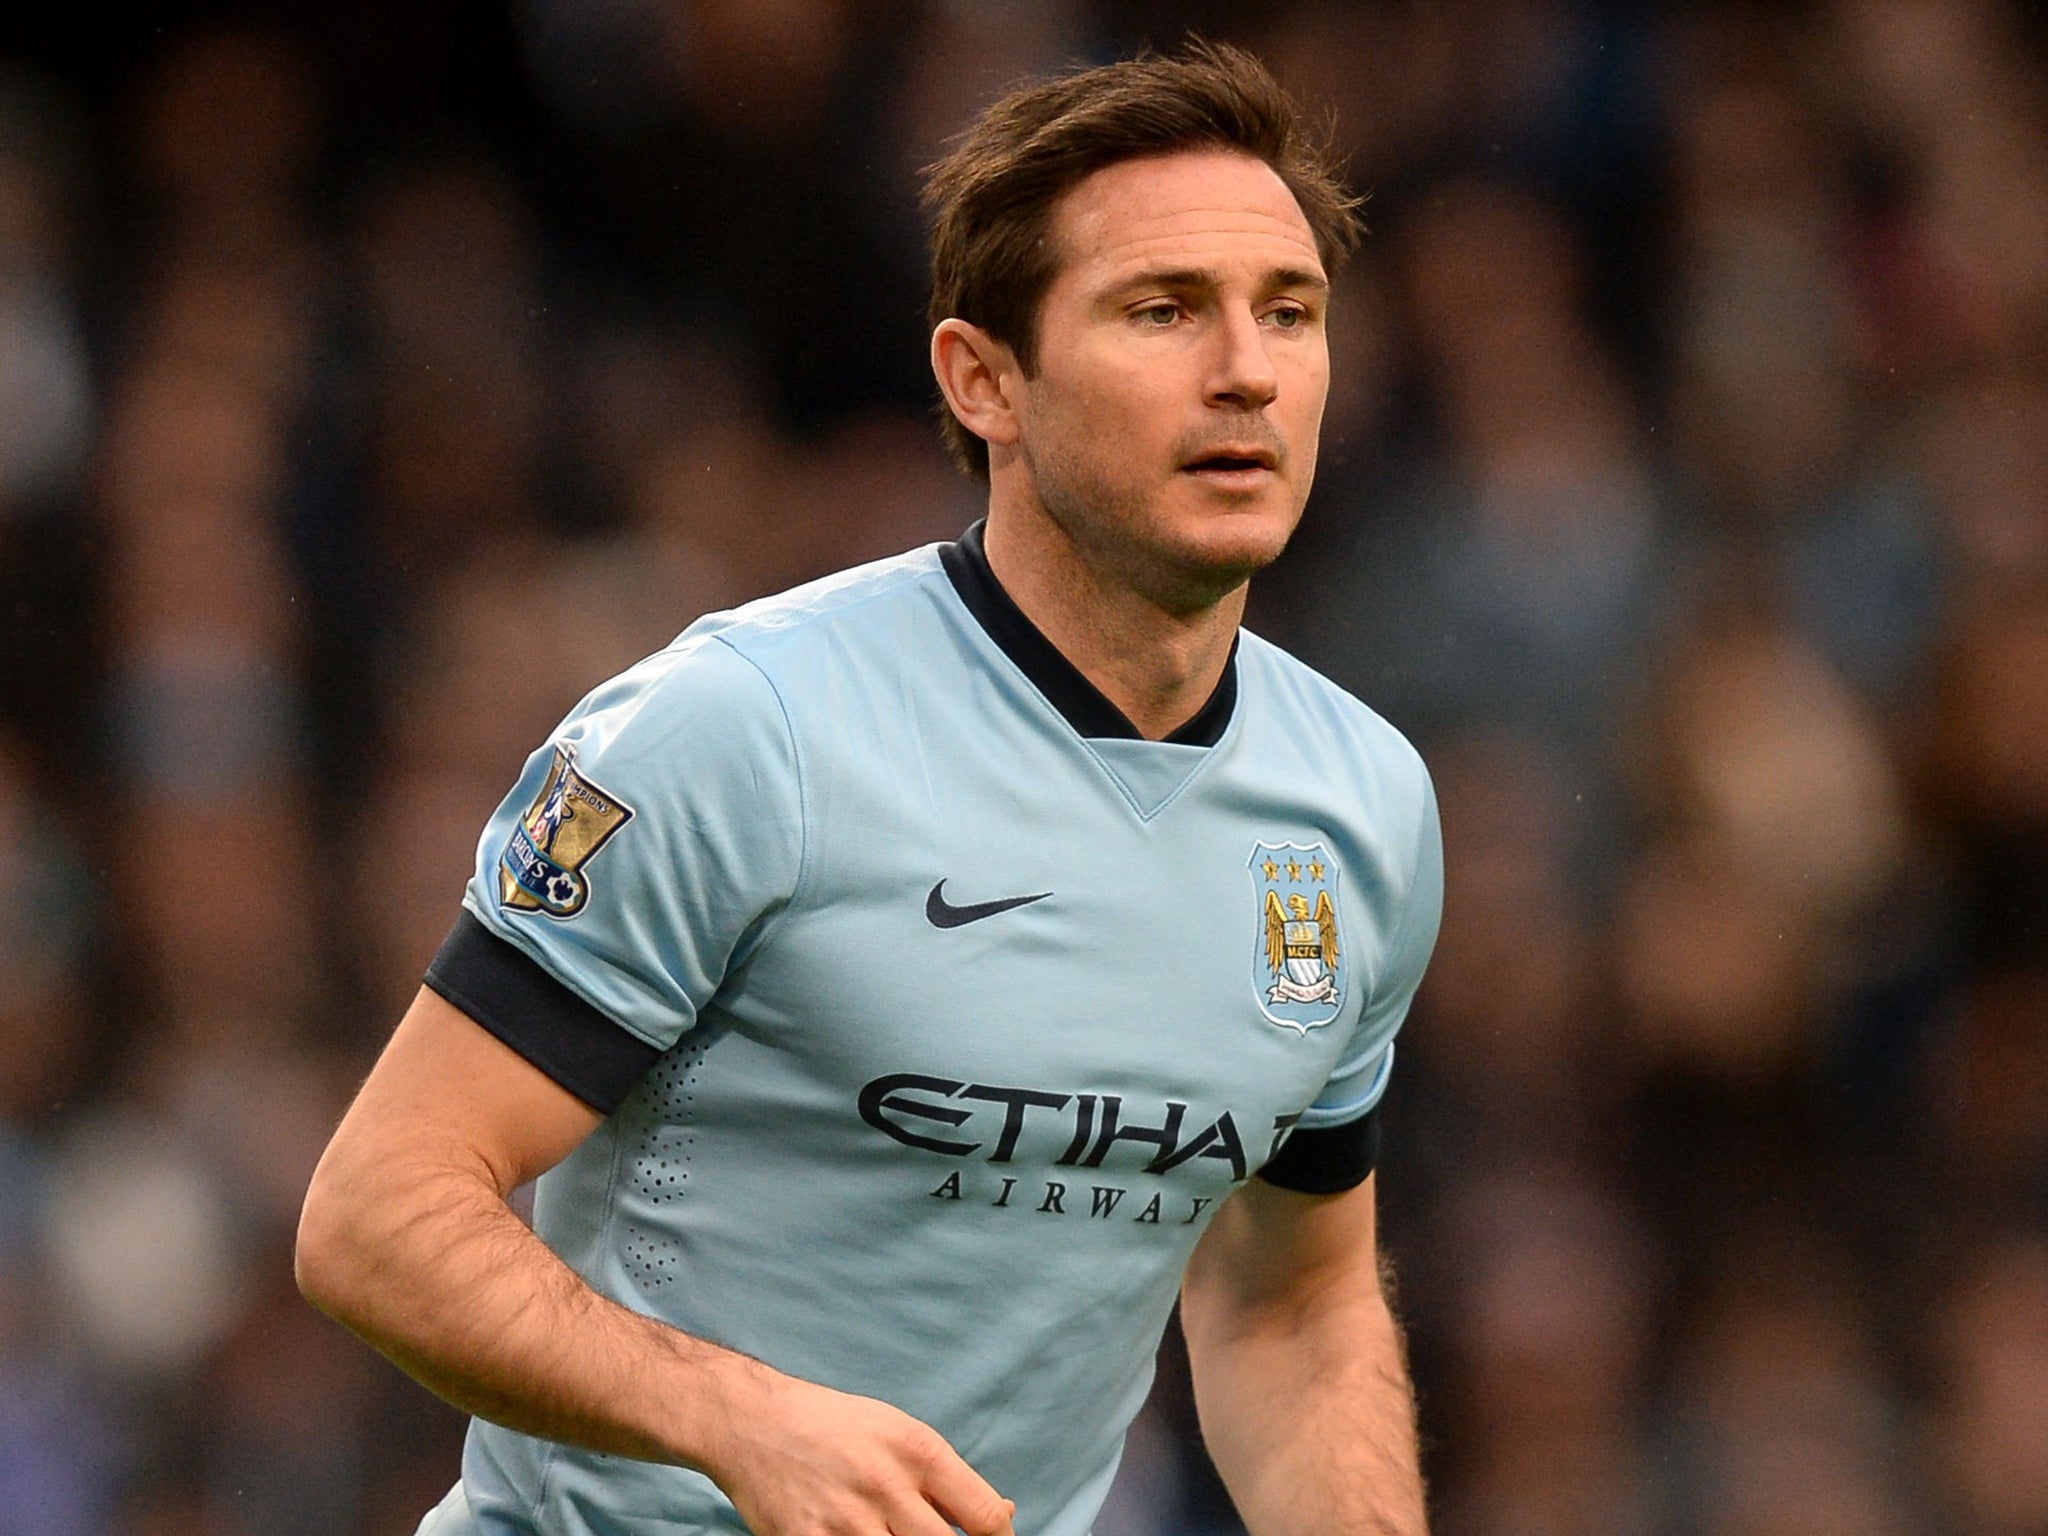 Frank Lampard was due to join New York City on 1 January, but Manchester City have kept him